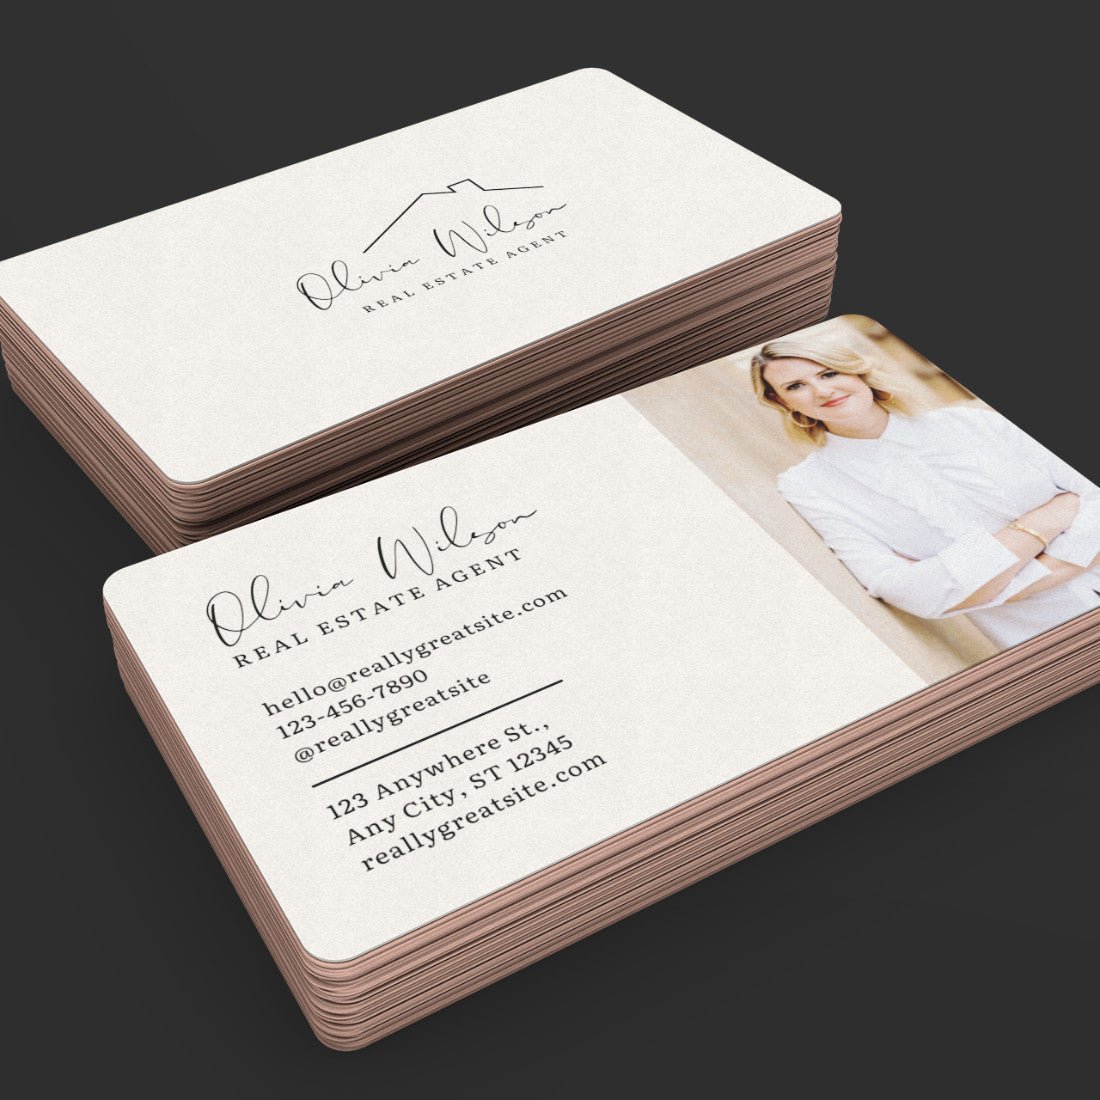 Real Estate Business Cards - Print Peppermint